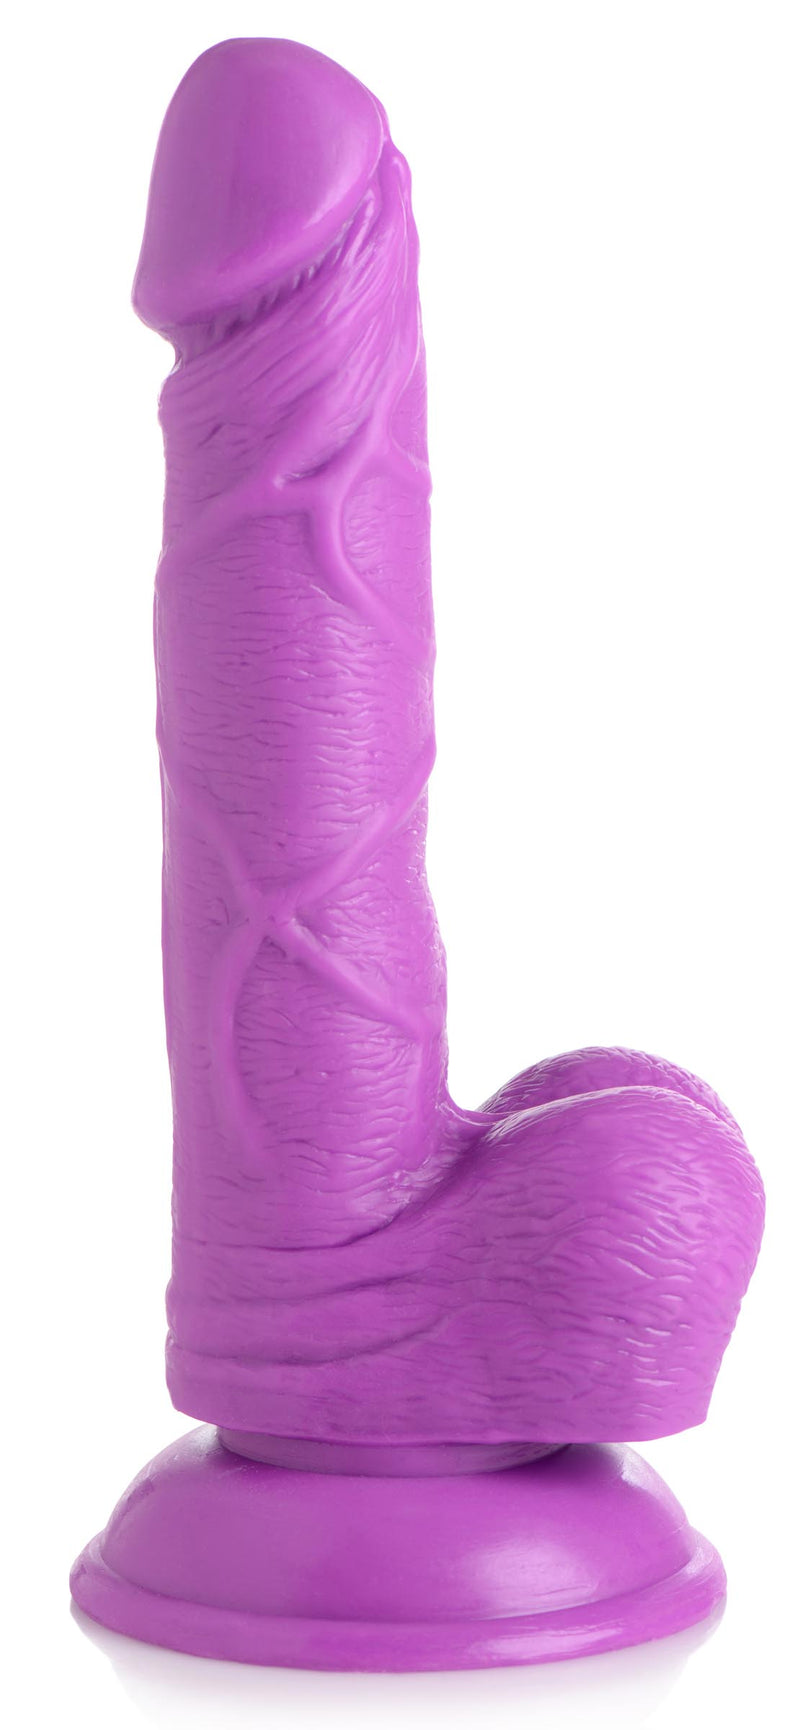 6.5 Inch Realistic Dildo with Balls - Purple Dildos from Pop Peckers